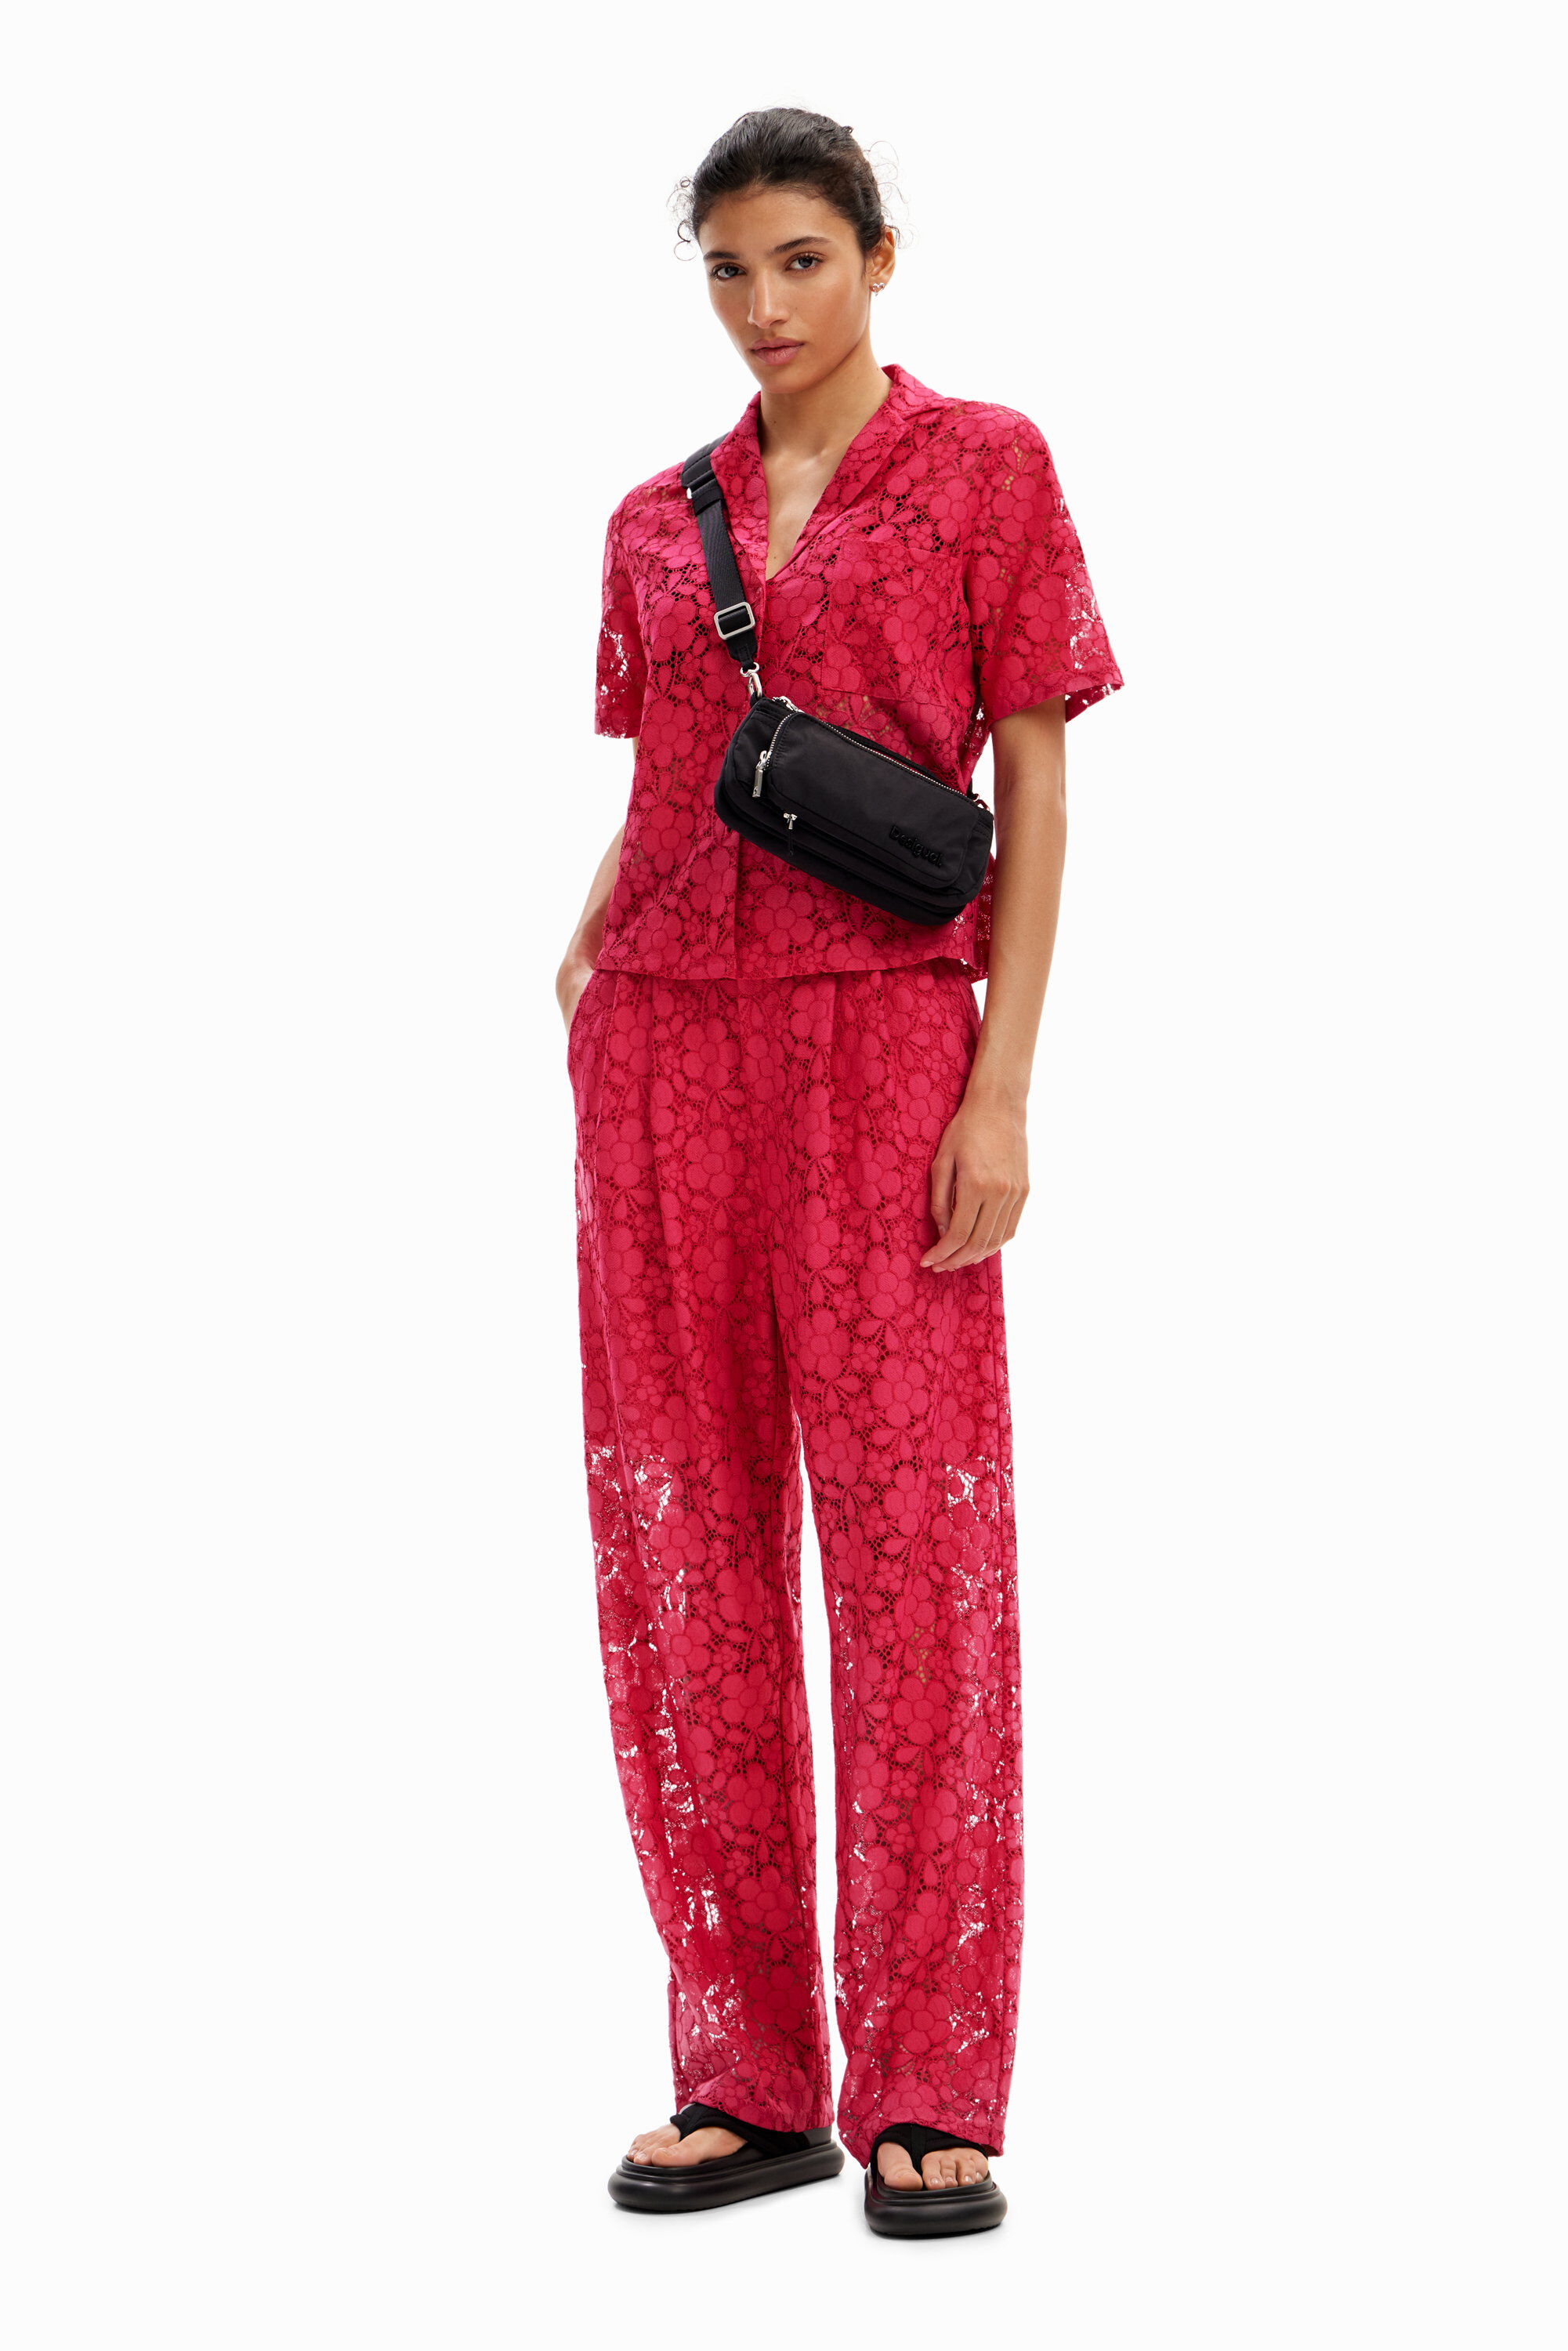 Desigual Tailored floral lace trousers